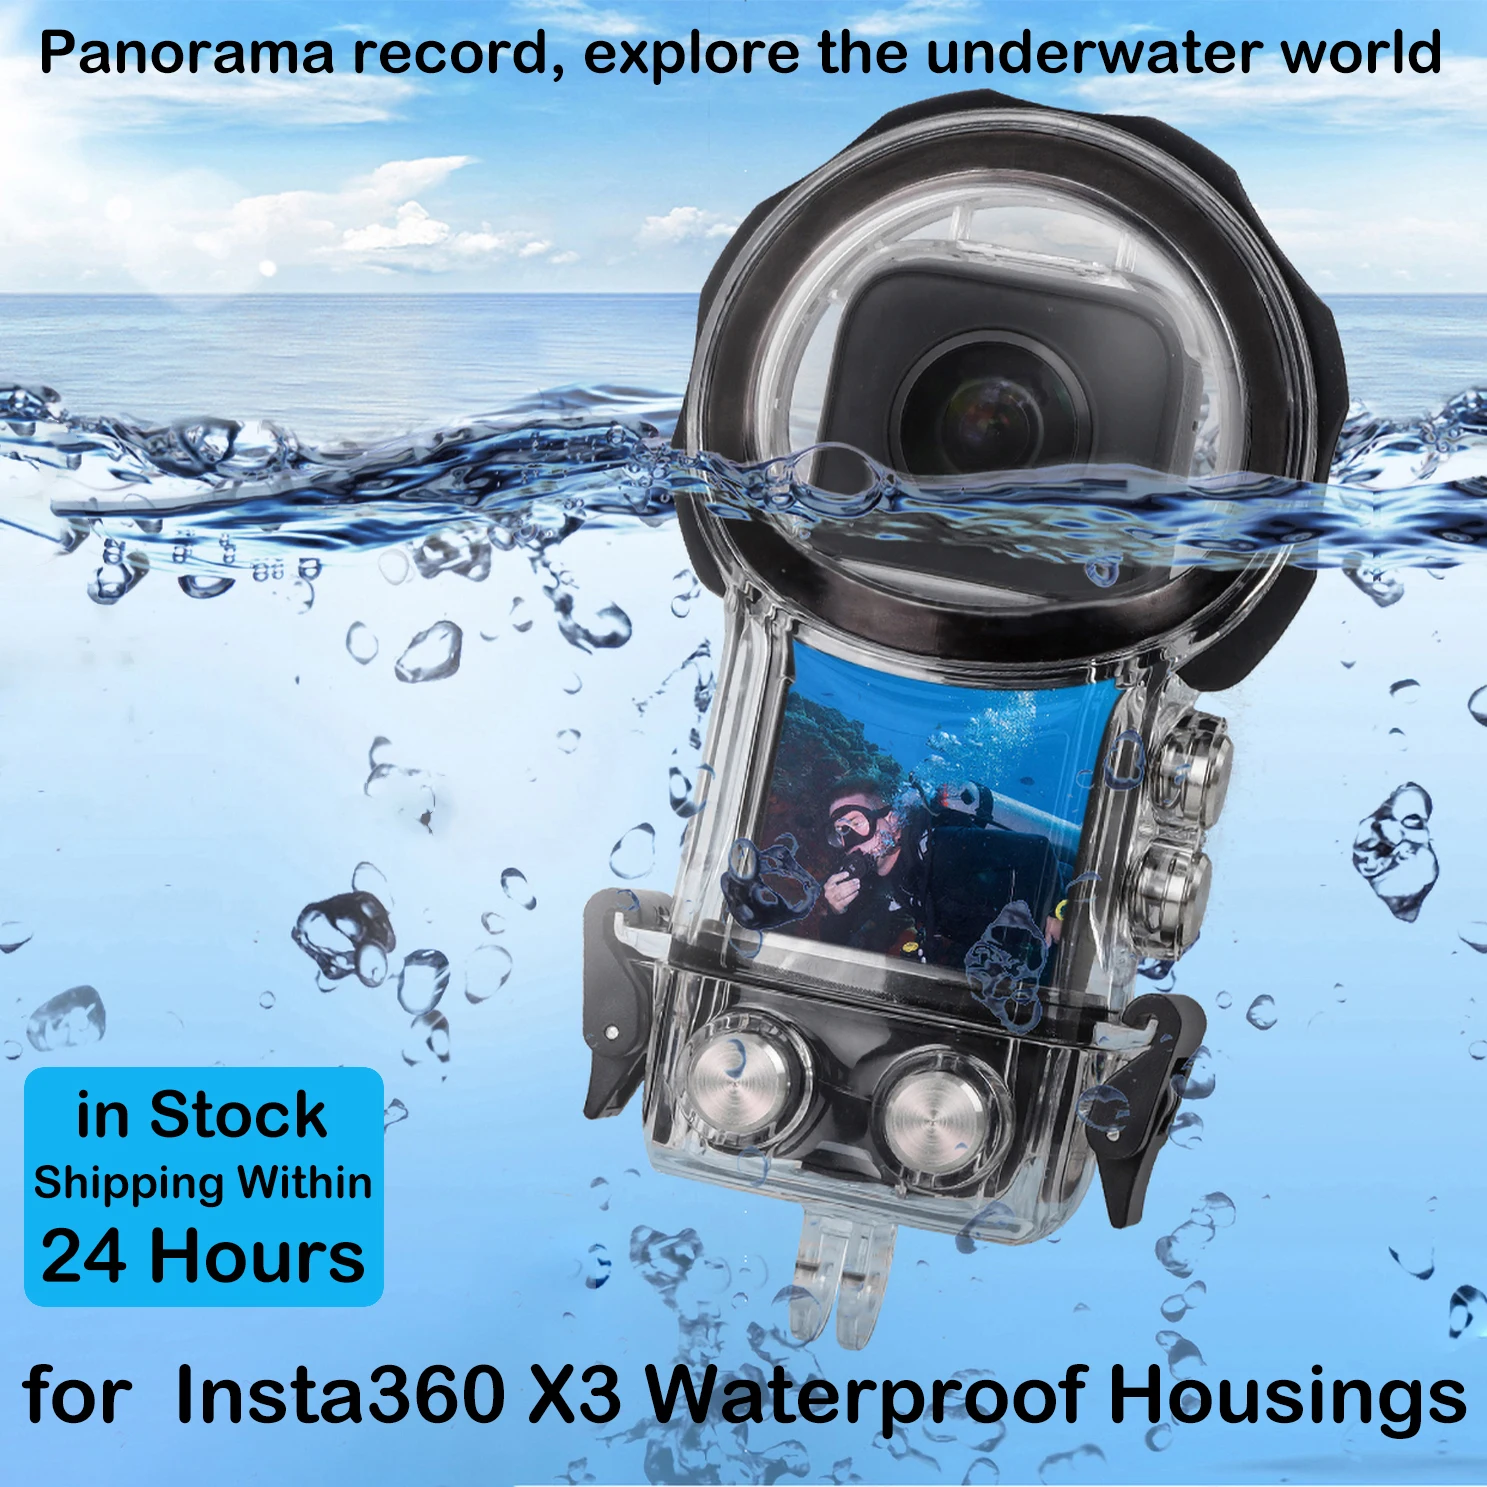 New for Insta360 X3 360° Video Camera 40m Waterproof Housings Sealing Submersible Shell Protect Action Camera Accessory in Stock